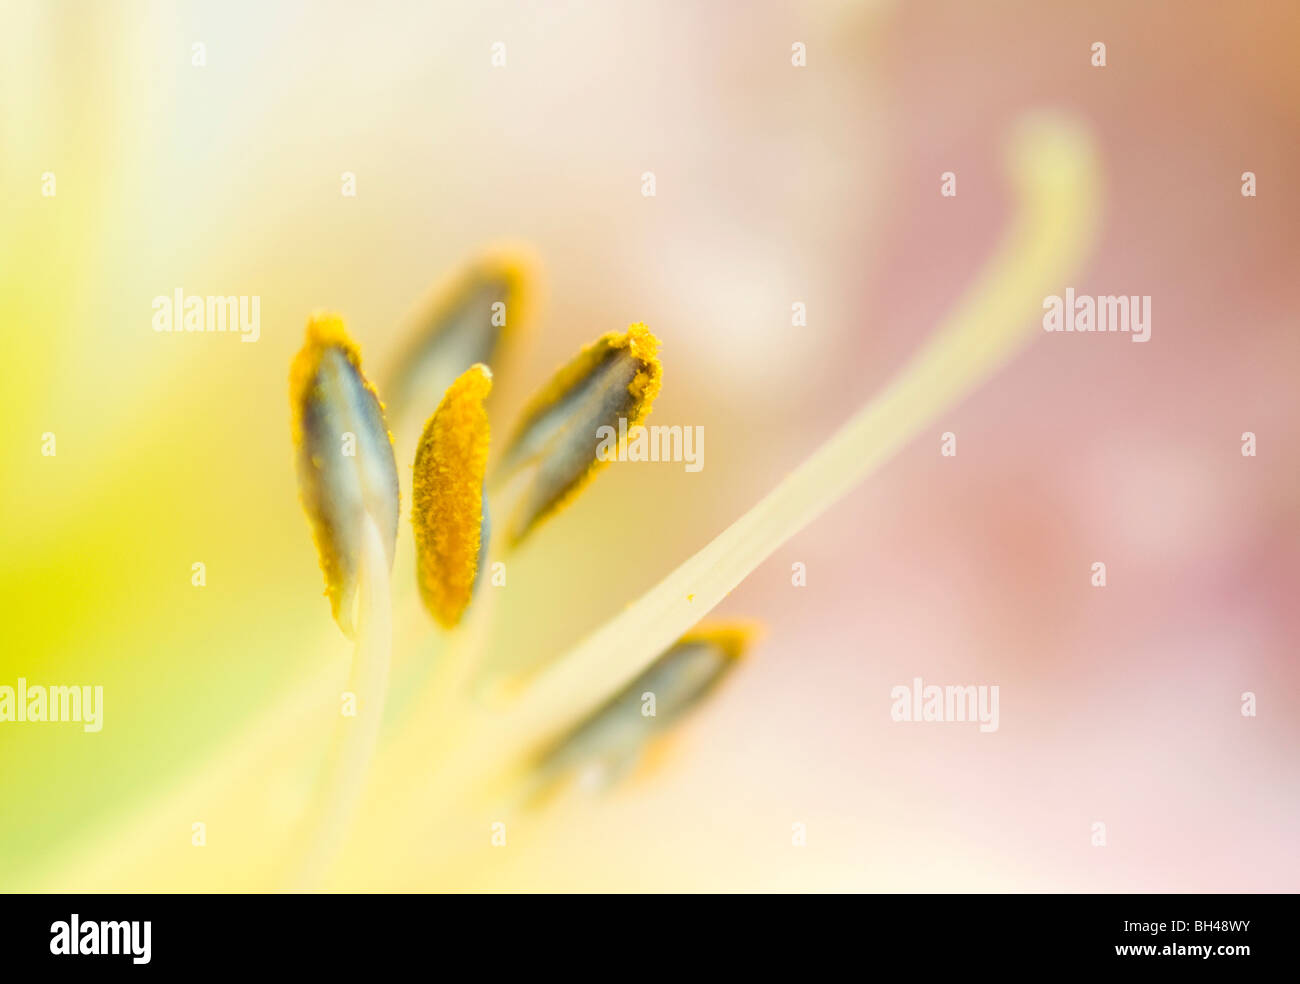 Lily stamens. Creative close up abstract image of stamens in soft focus. Stock Photo